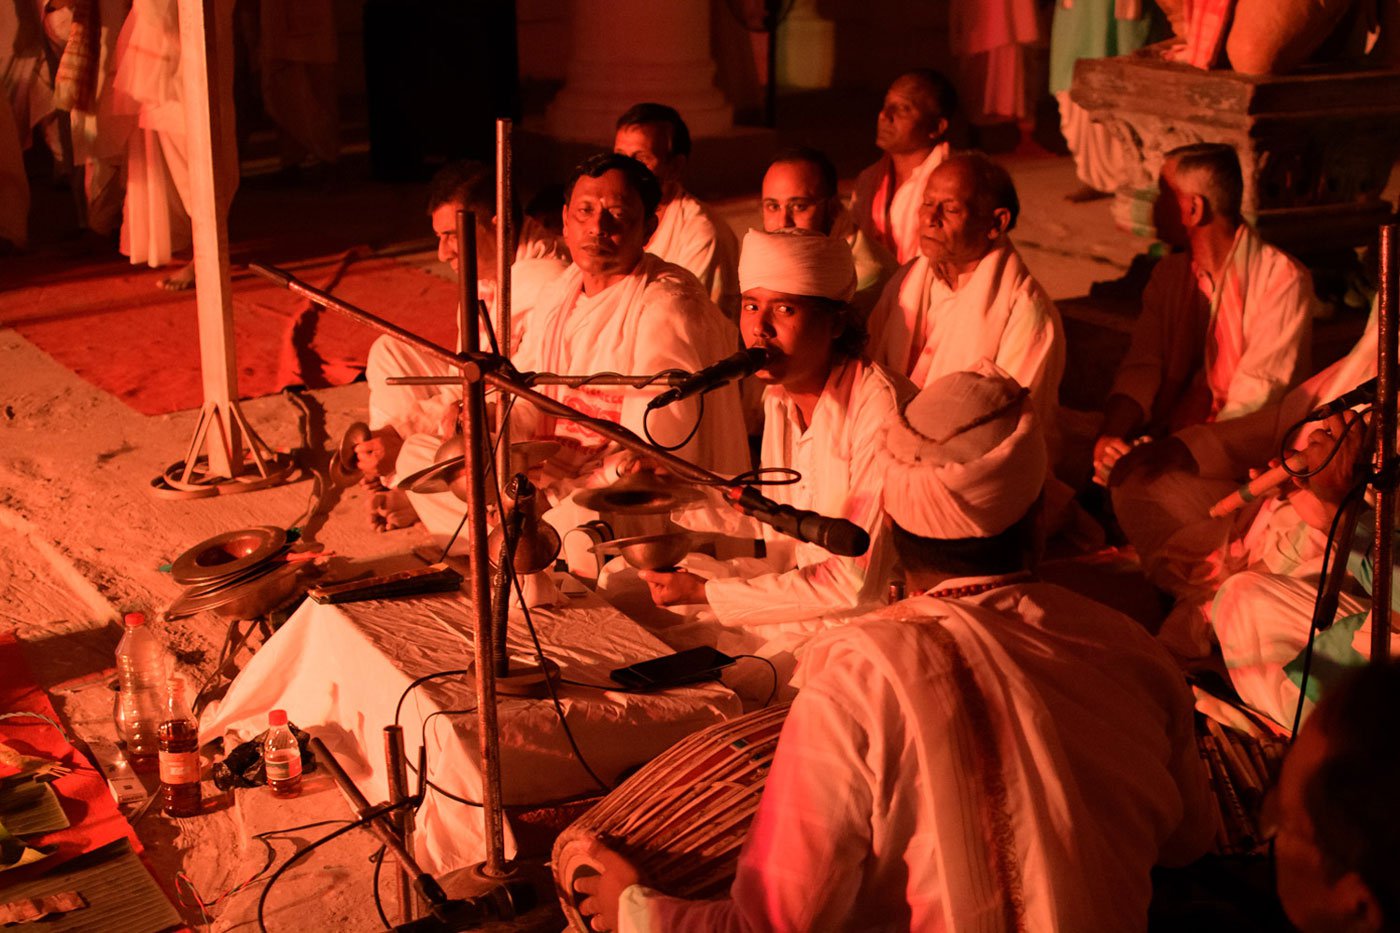 Debojit Dutta (centre) sings with the group of gayans to provide the background music in the folk play, Nri Simha Jatra